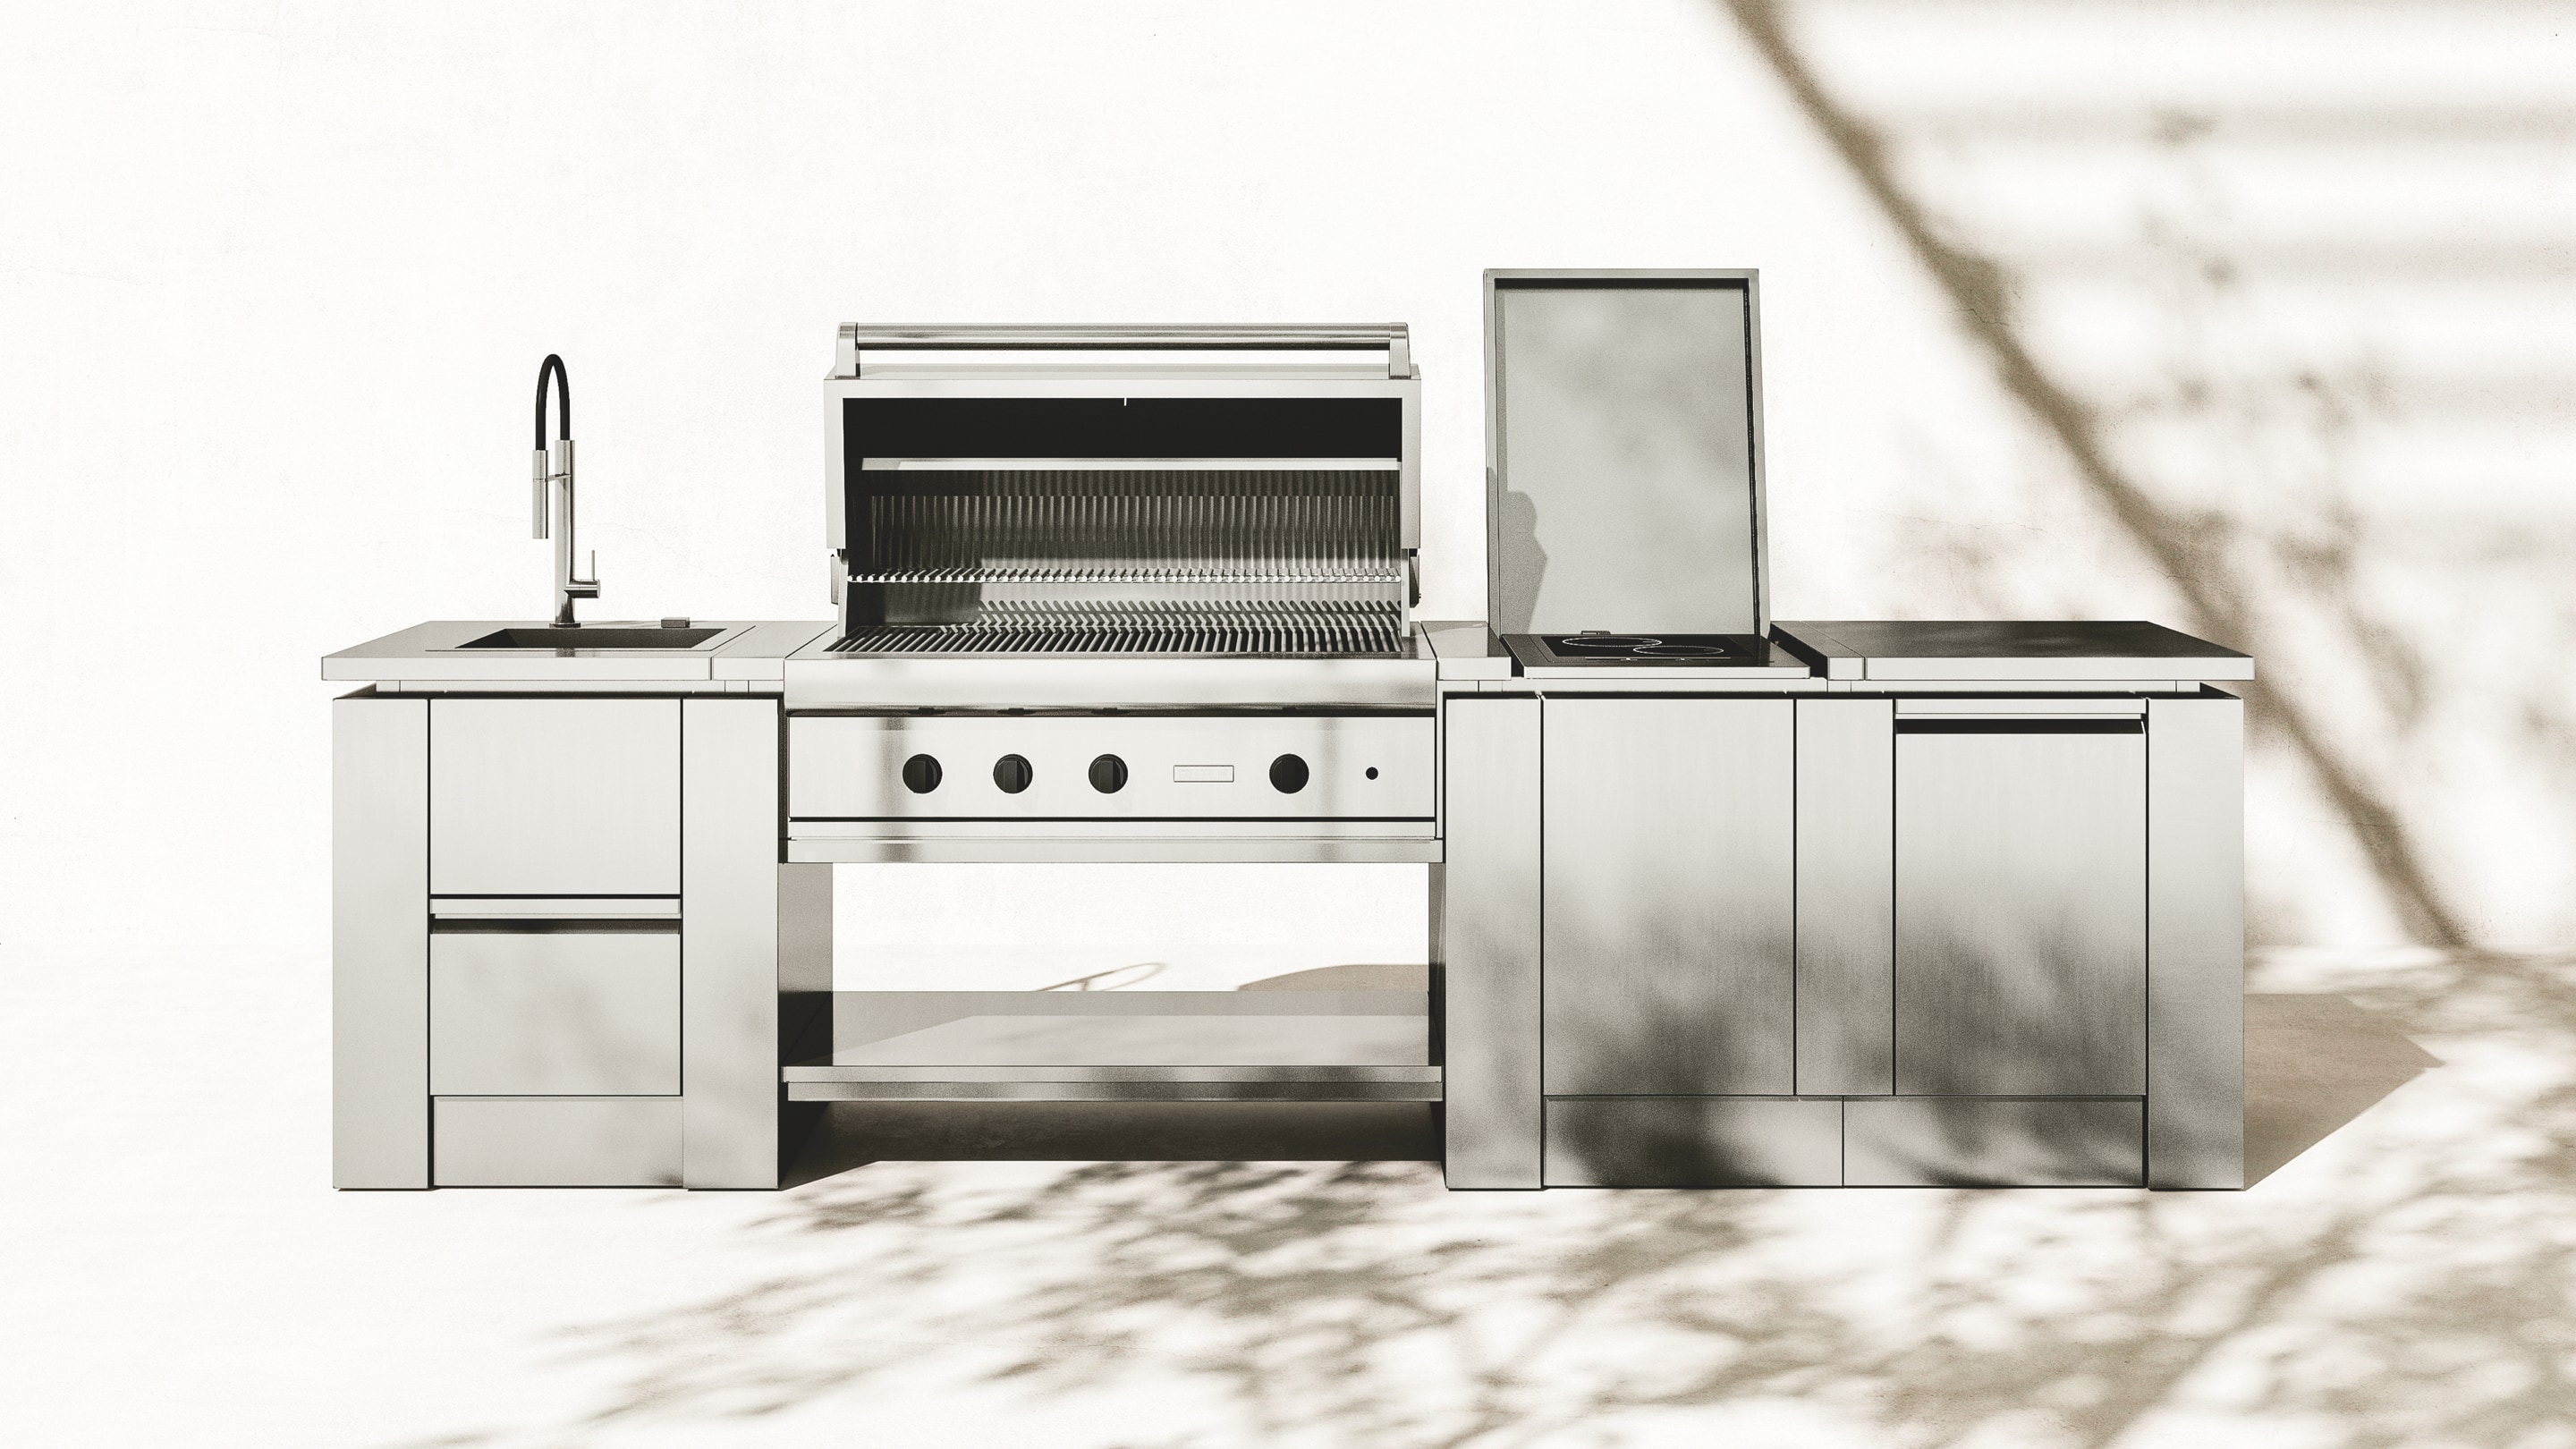 Leerling Mail rots R1 Outdoor Kitchen | ROK